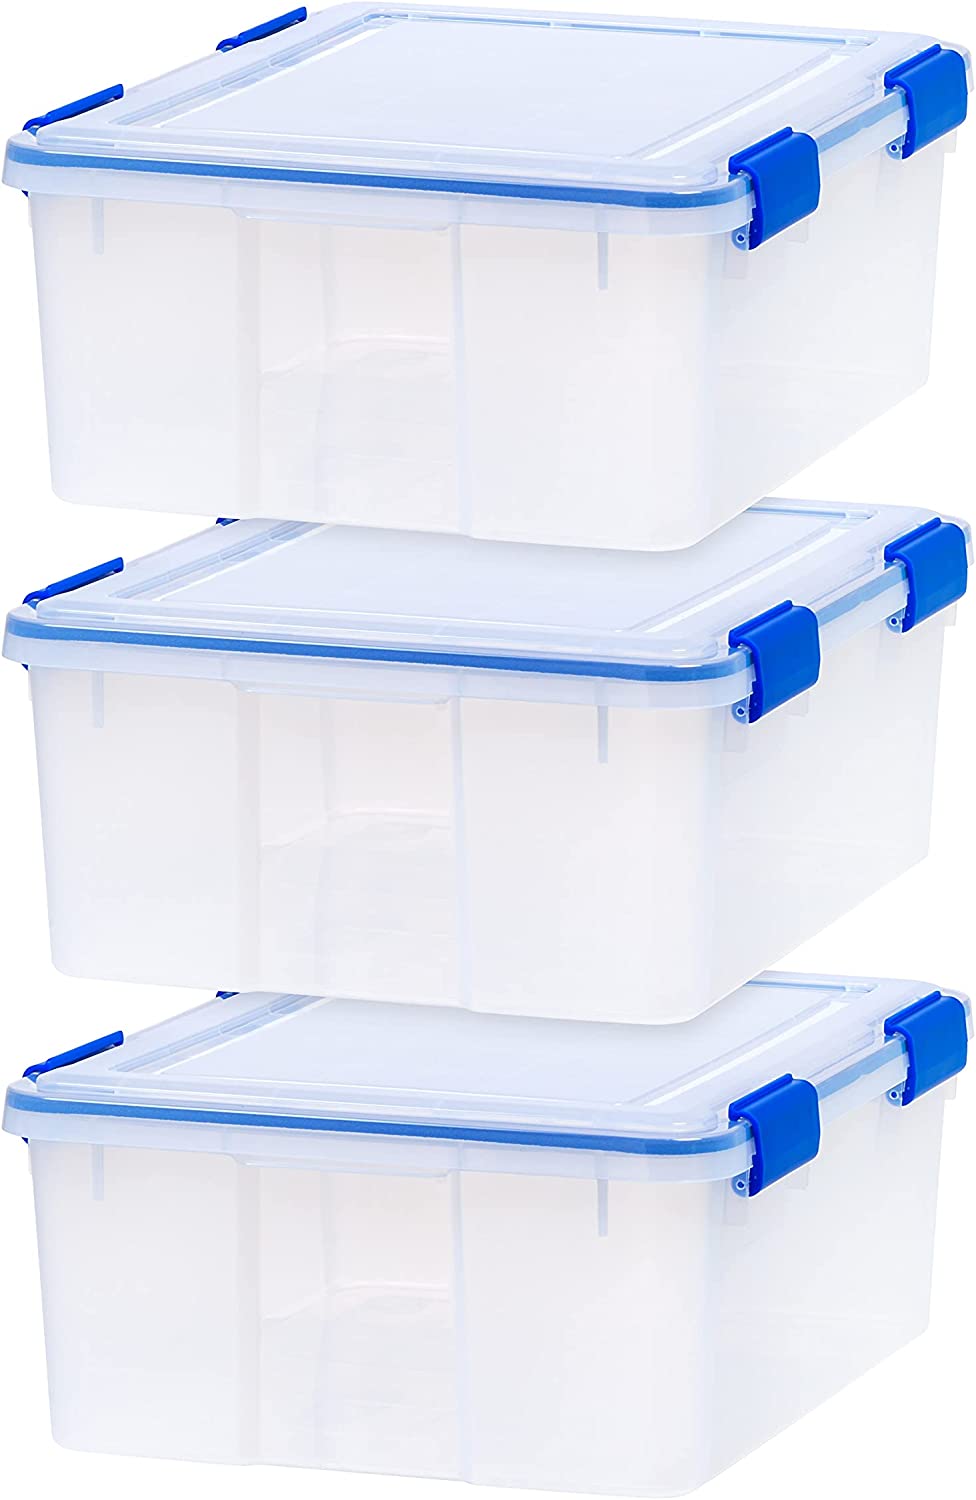 IRIS USA 60 Quart WEATHERPRO Plastic Storage Box with Durable Lid and Seal  and Secure Latching, Clear With Blue Buckles, Weathertight, 3 Pack